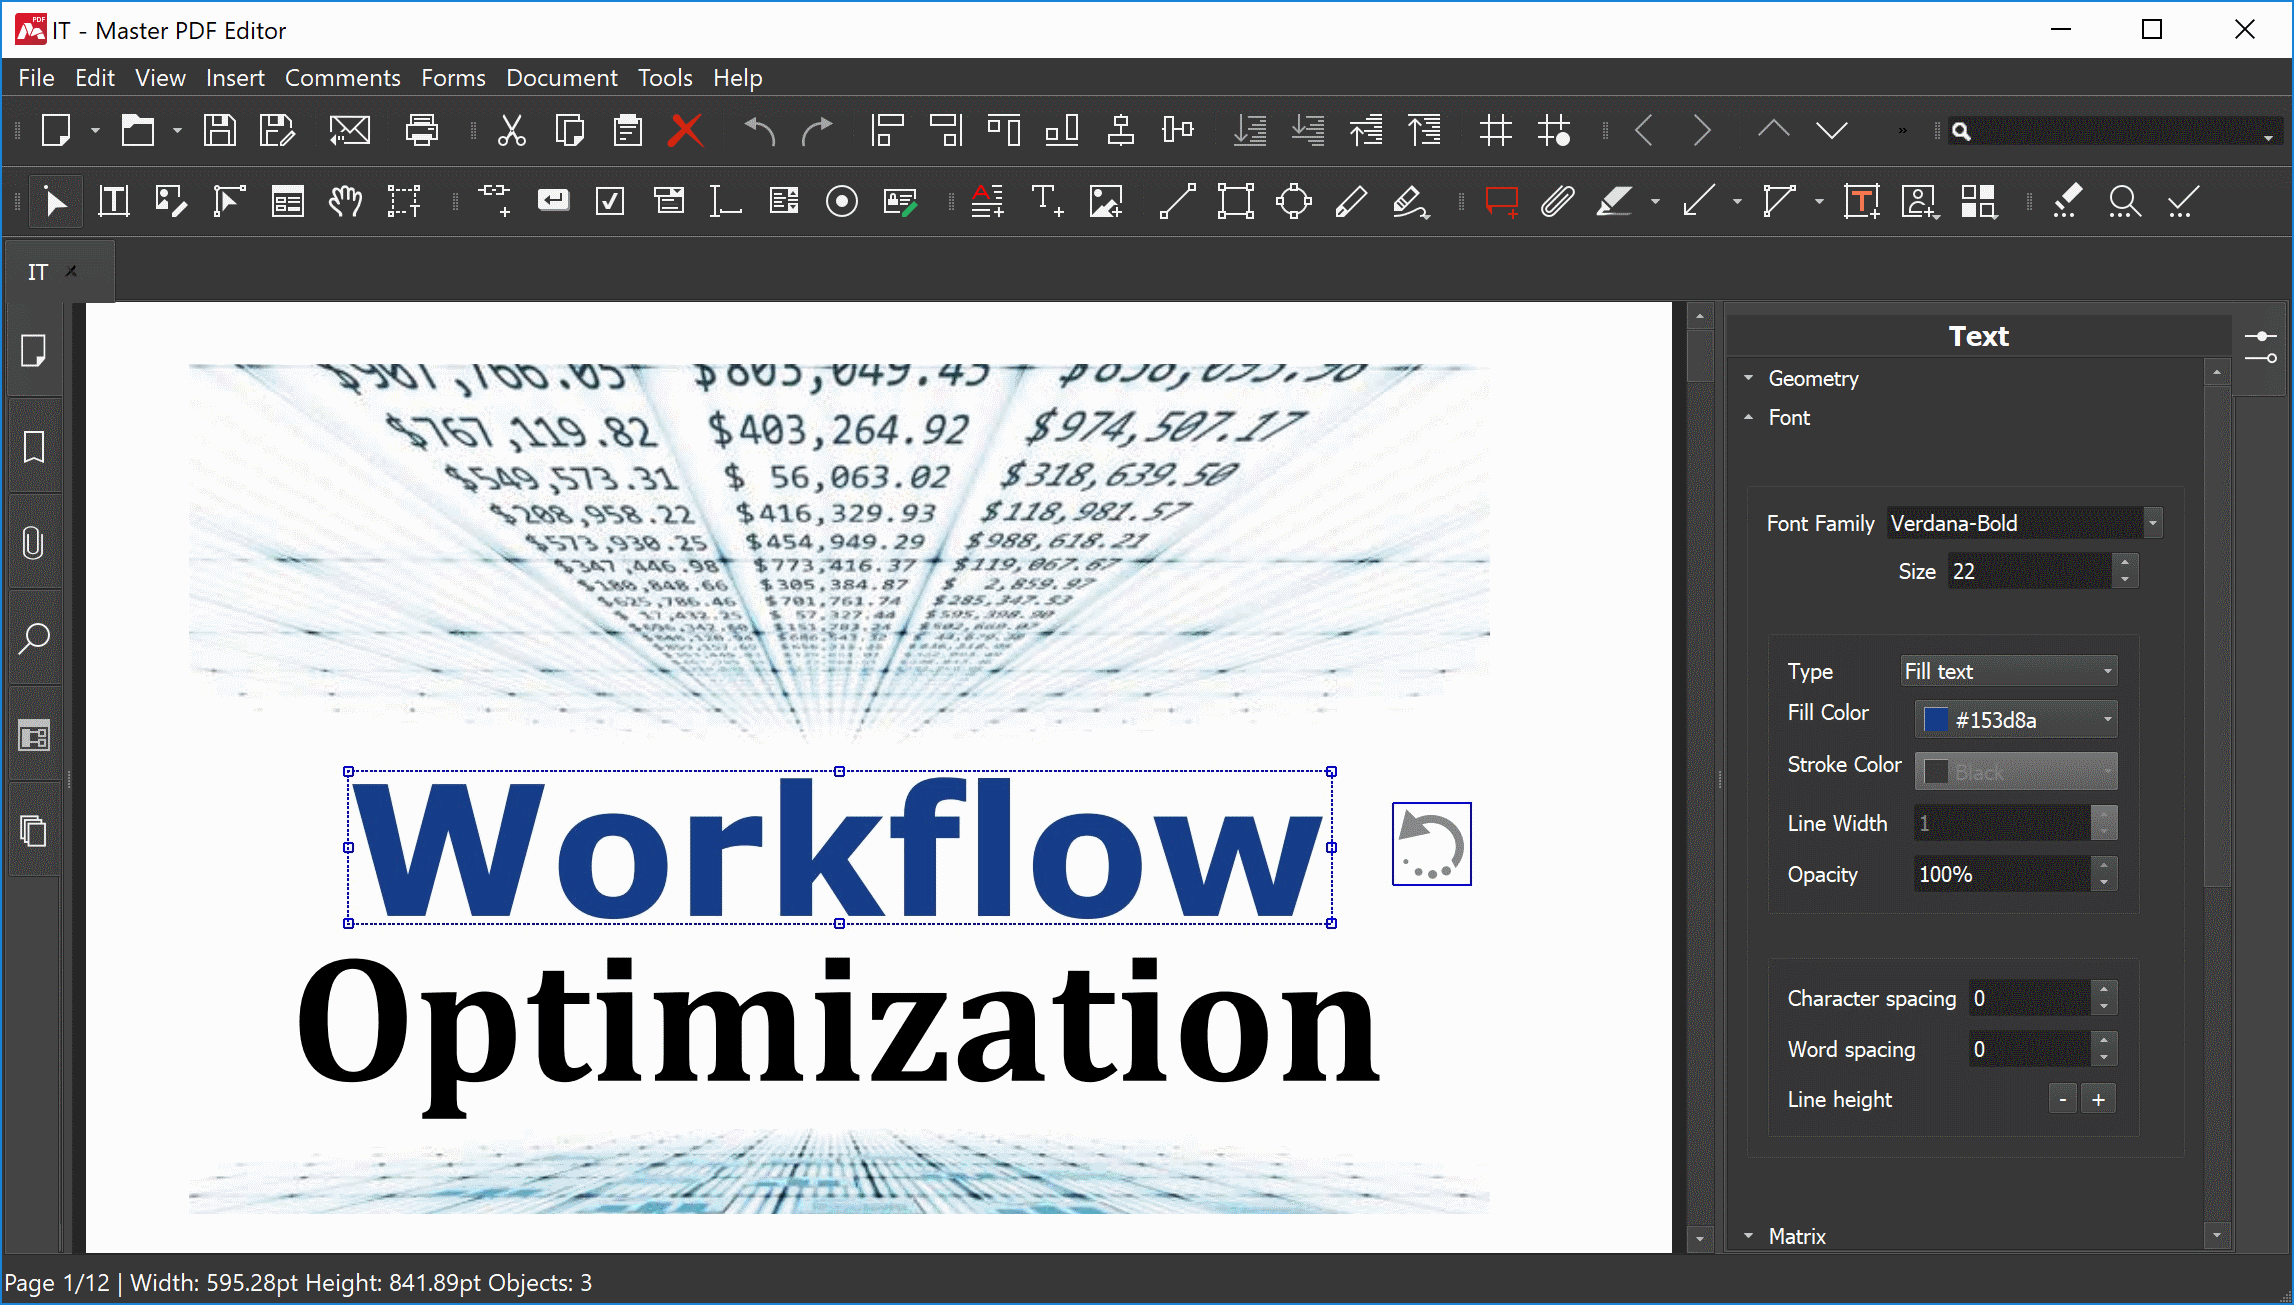 download the workflow